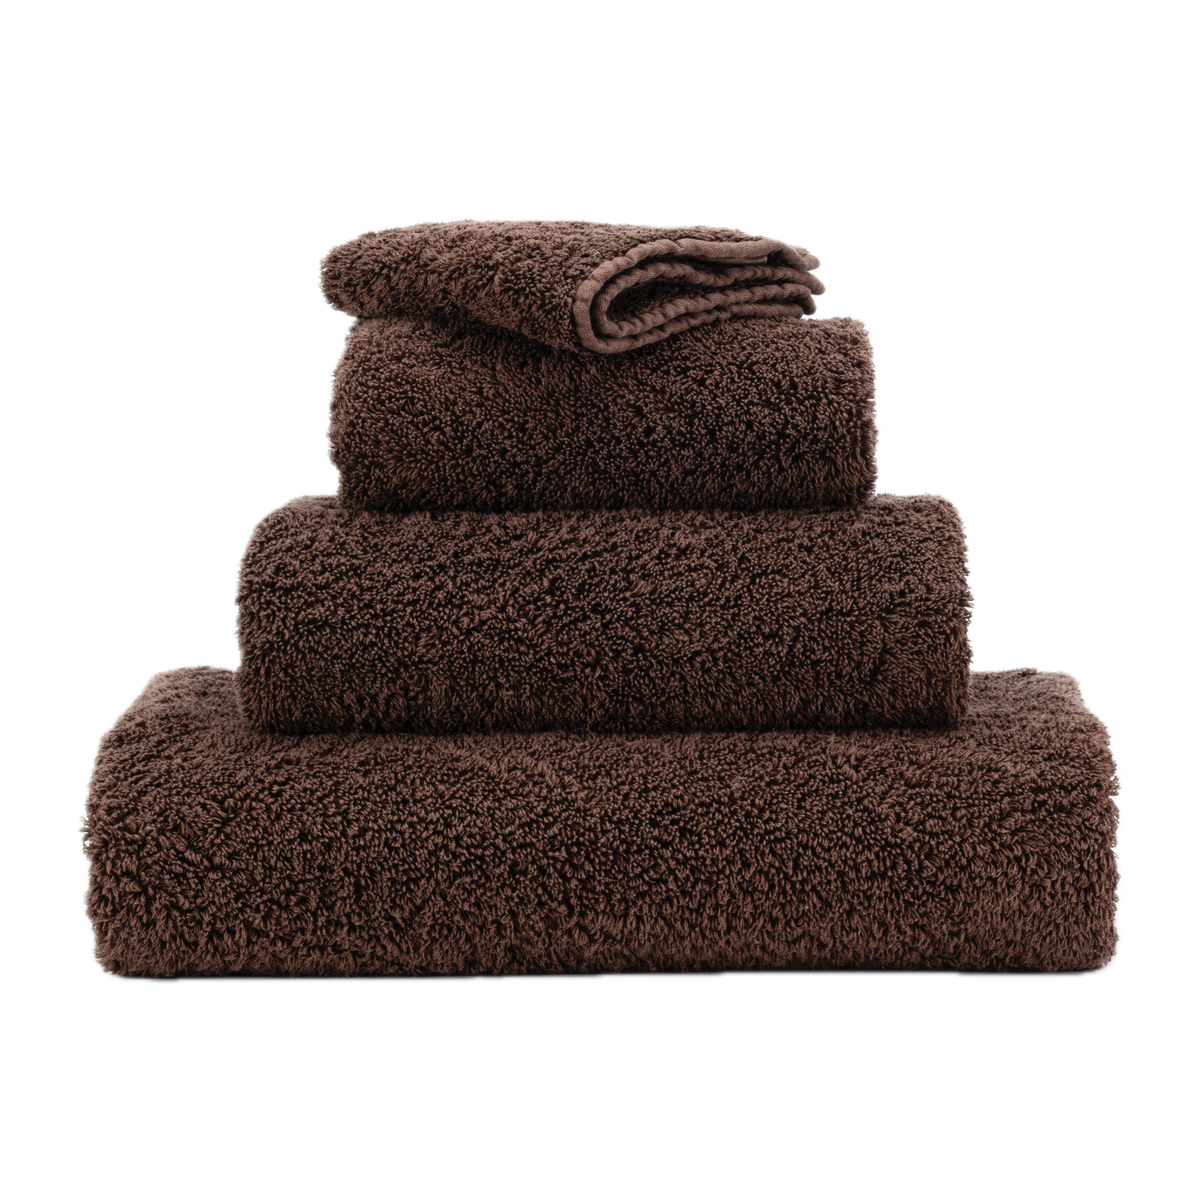 Stack of Abyss Super Pile Bath Towels in Mustang Color